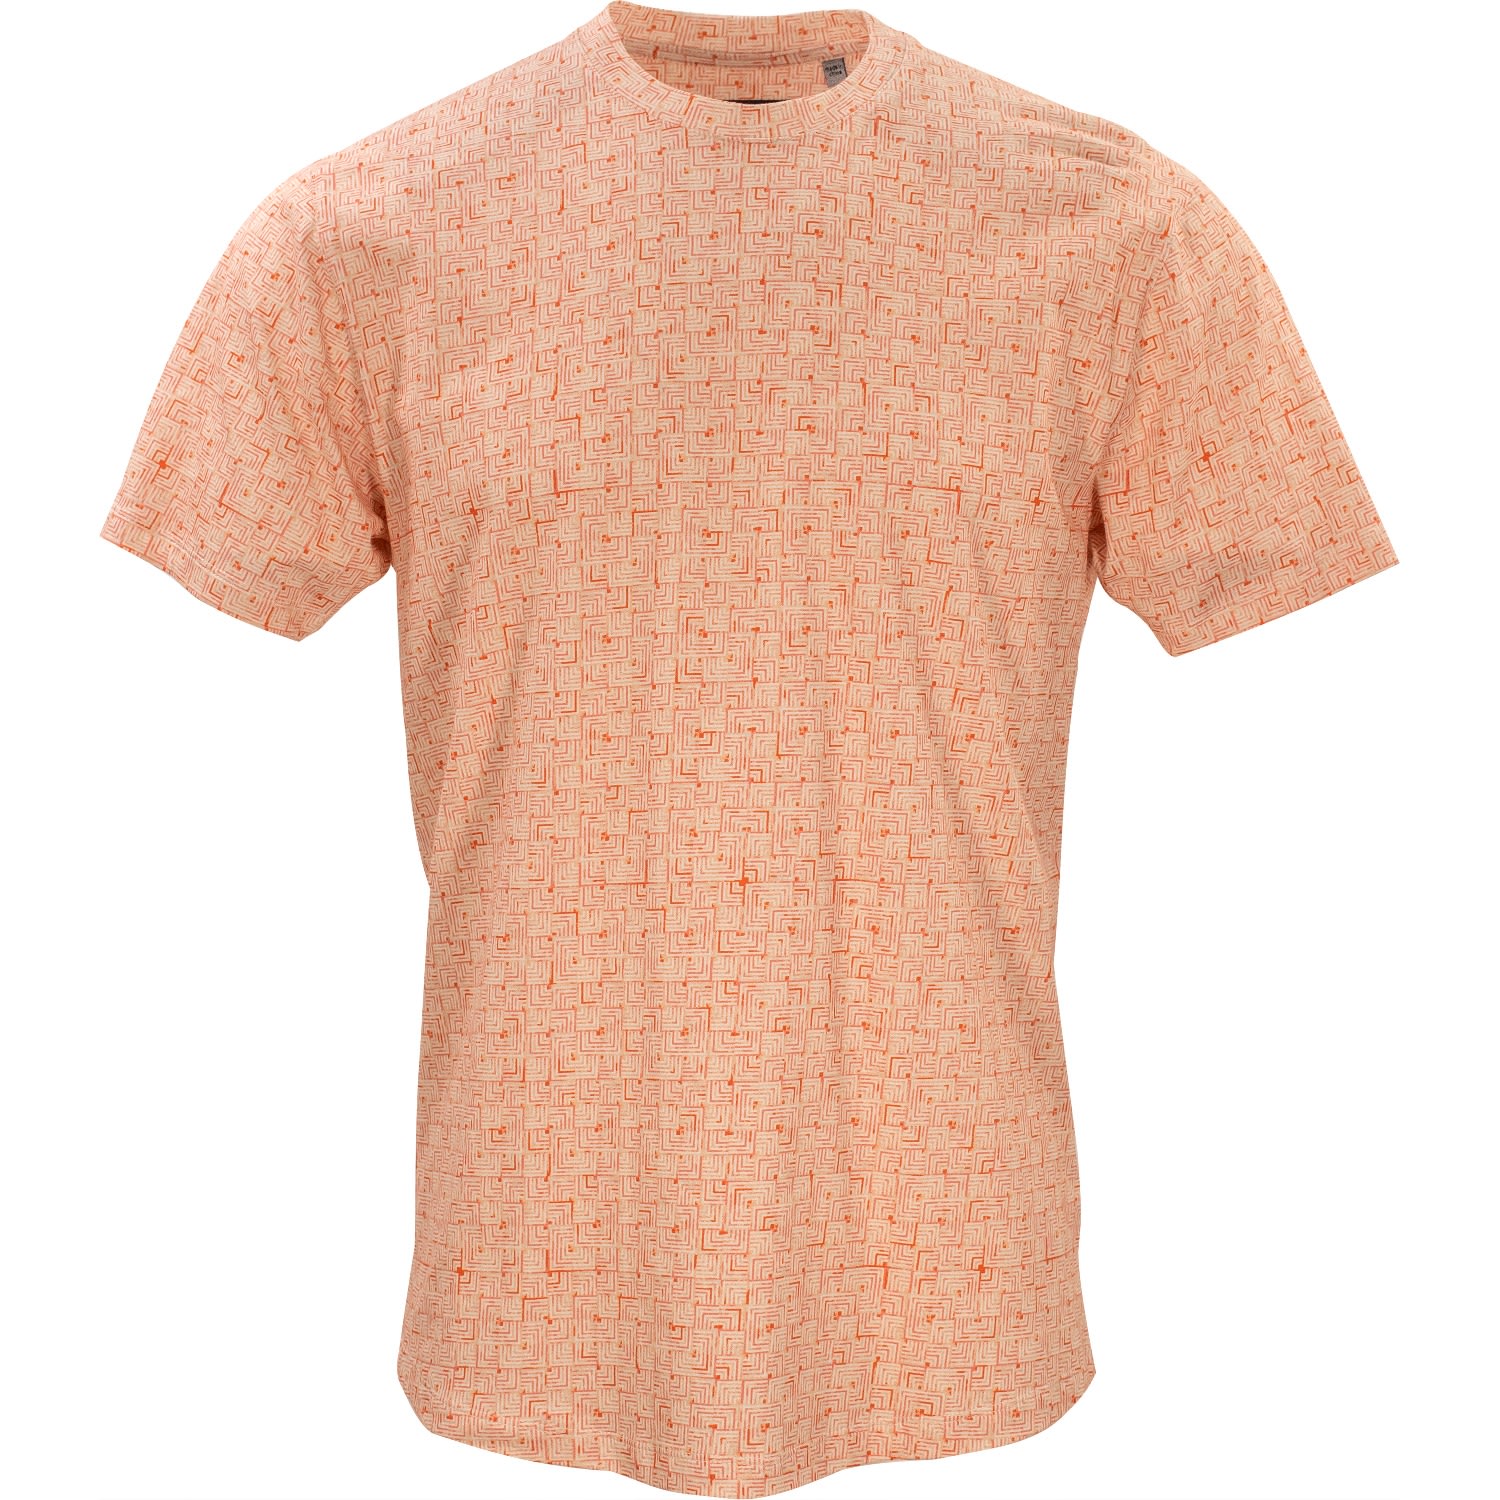 Men’s Yellow / Orange Taylor Parquet - Peach Small Lords of Harlech